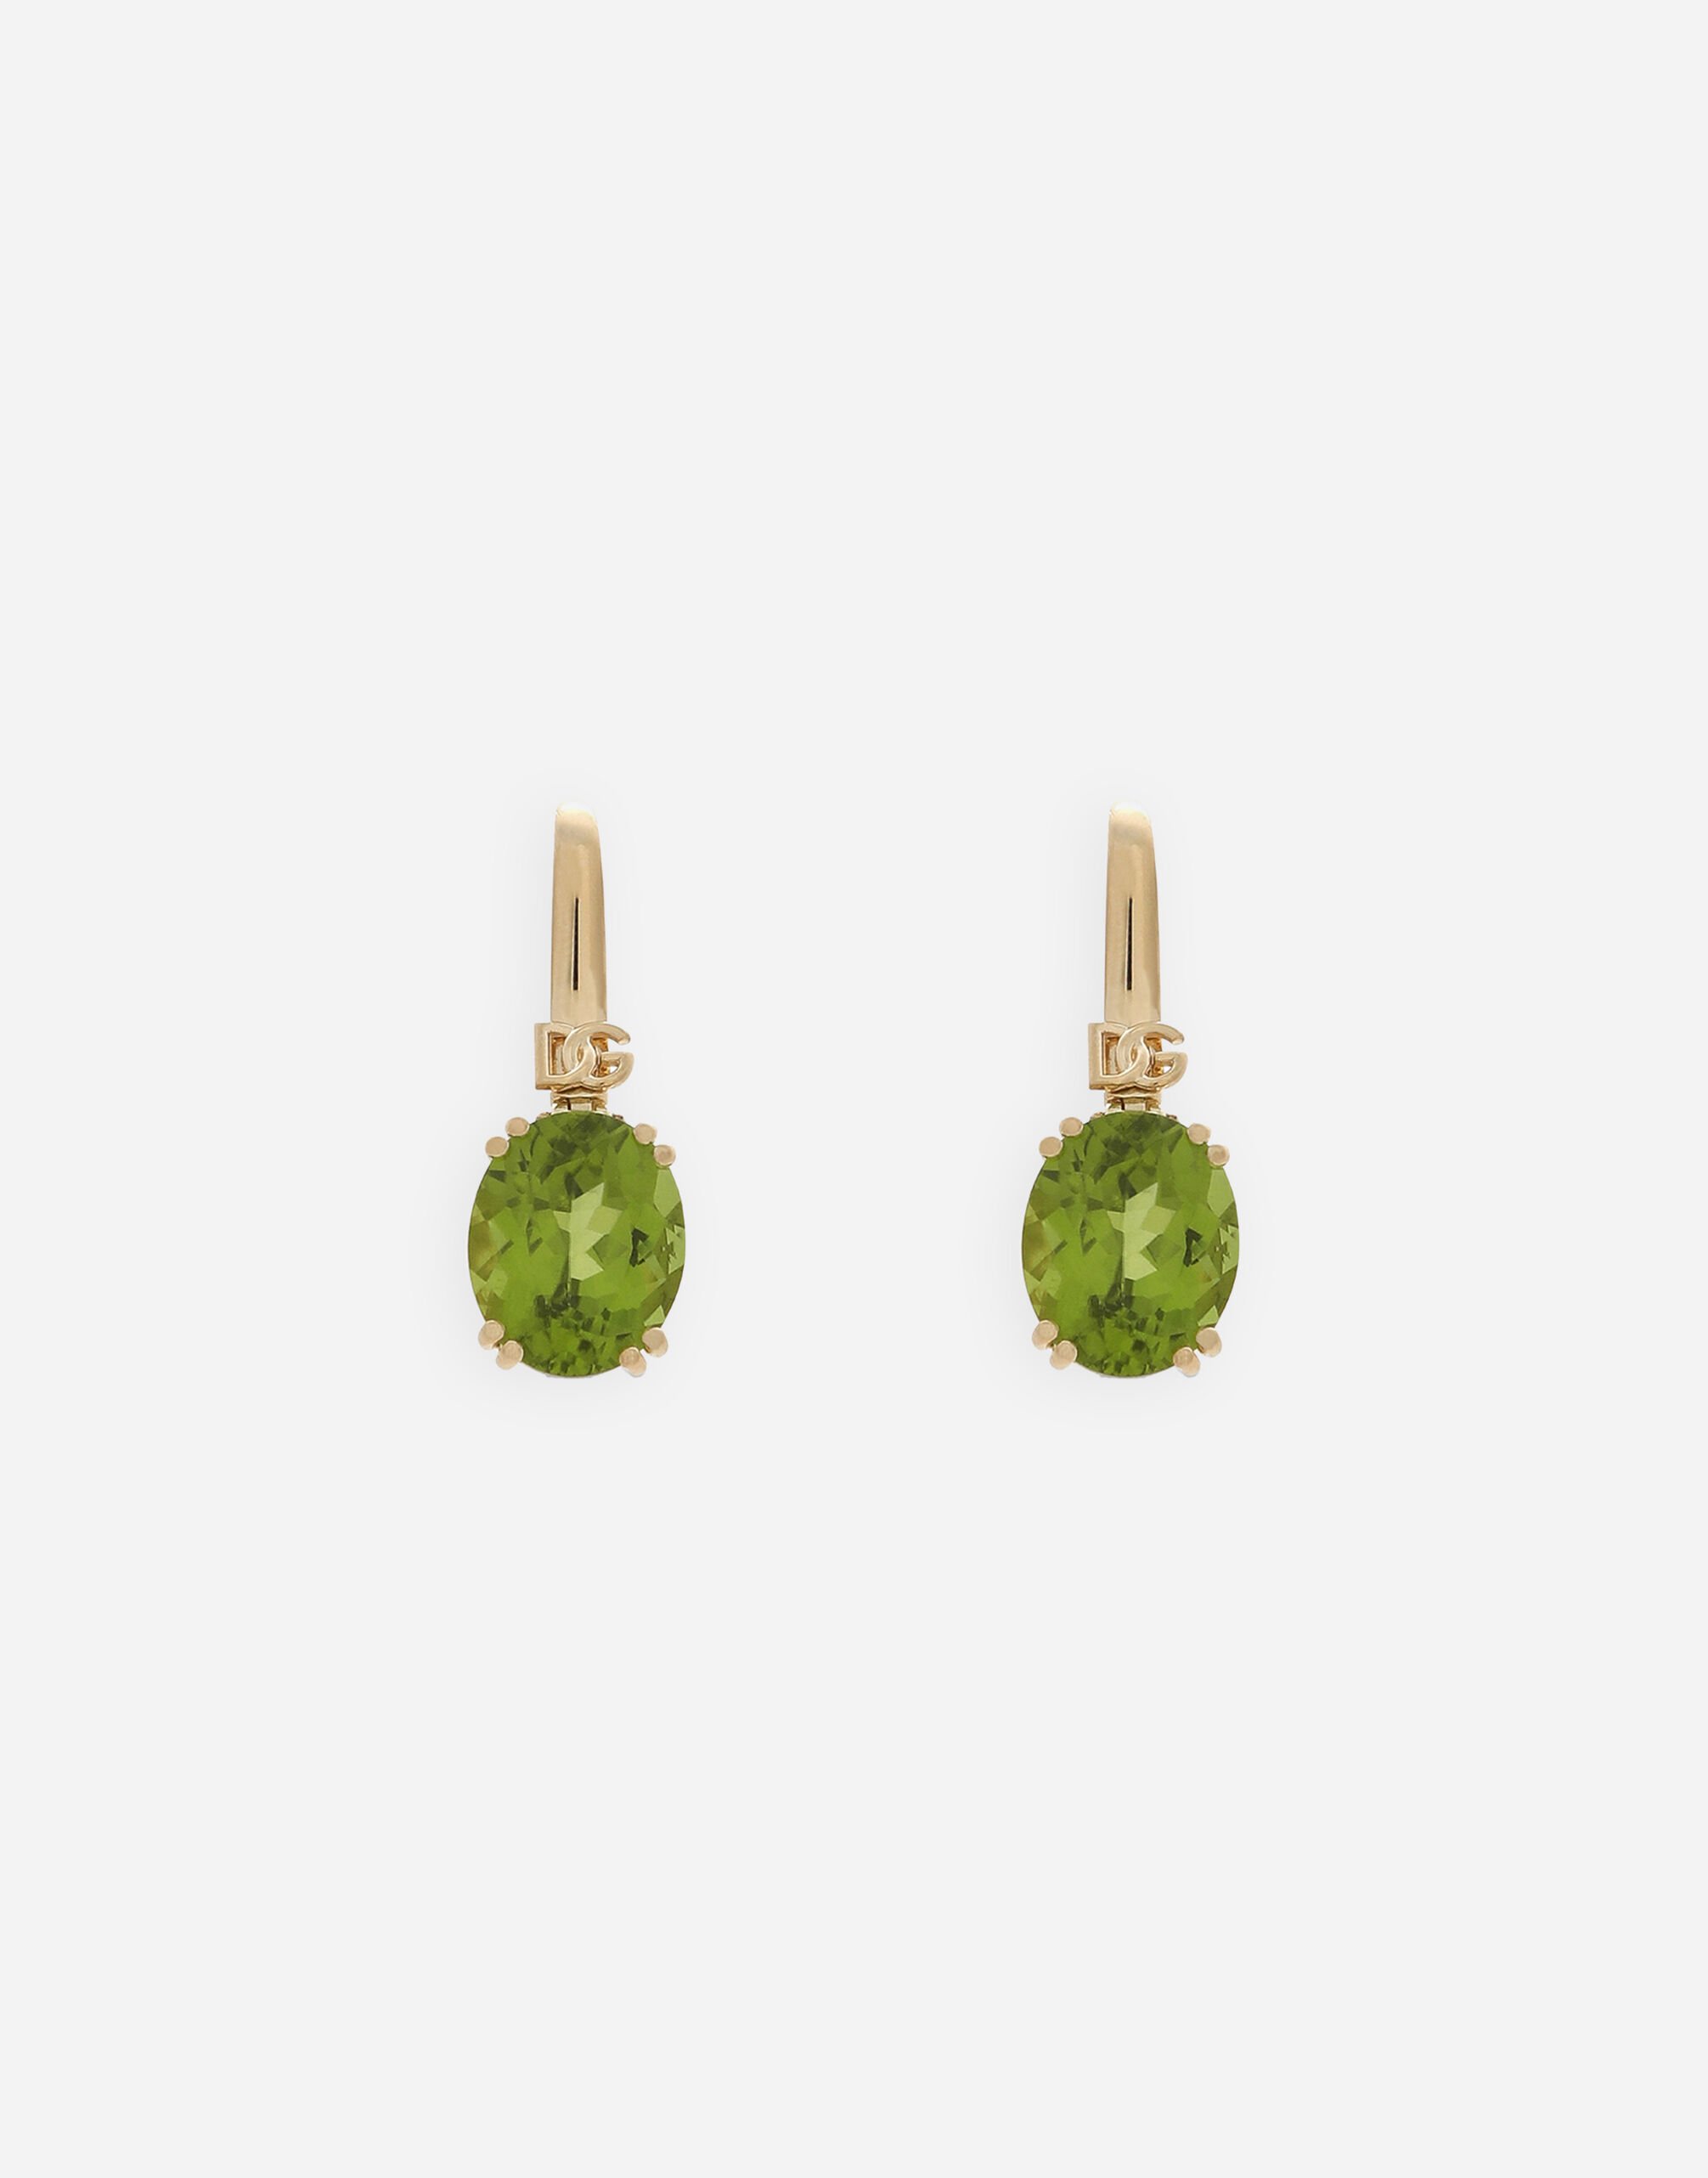 Dolce & Gabbana Anna earrings in yellow gold 18Kt and peridots Gold WERA2GWPE01